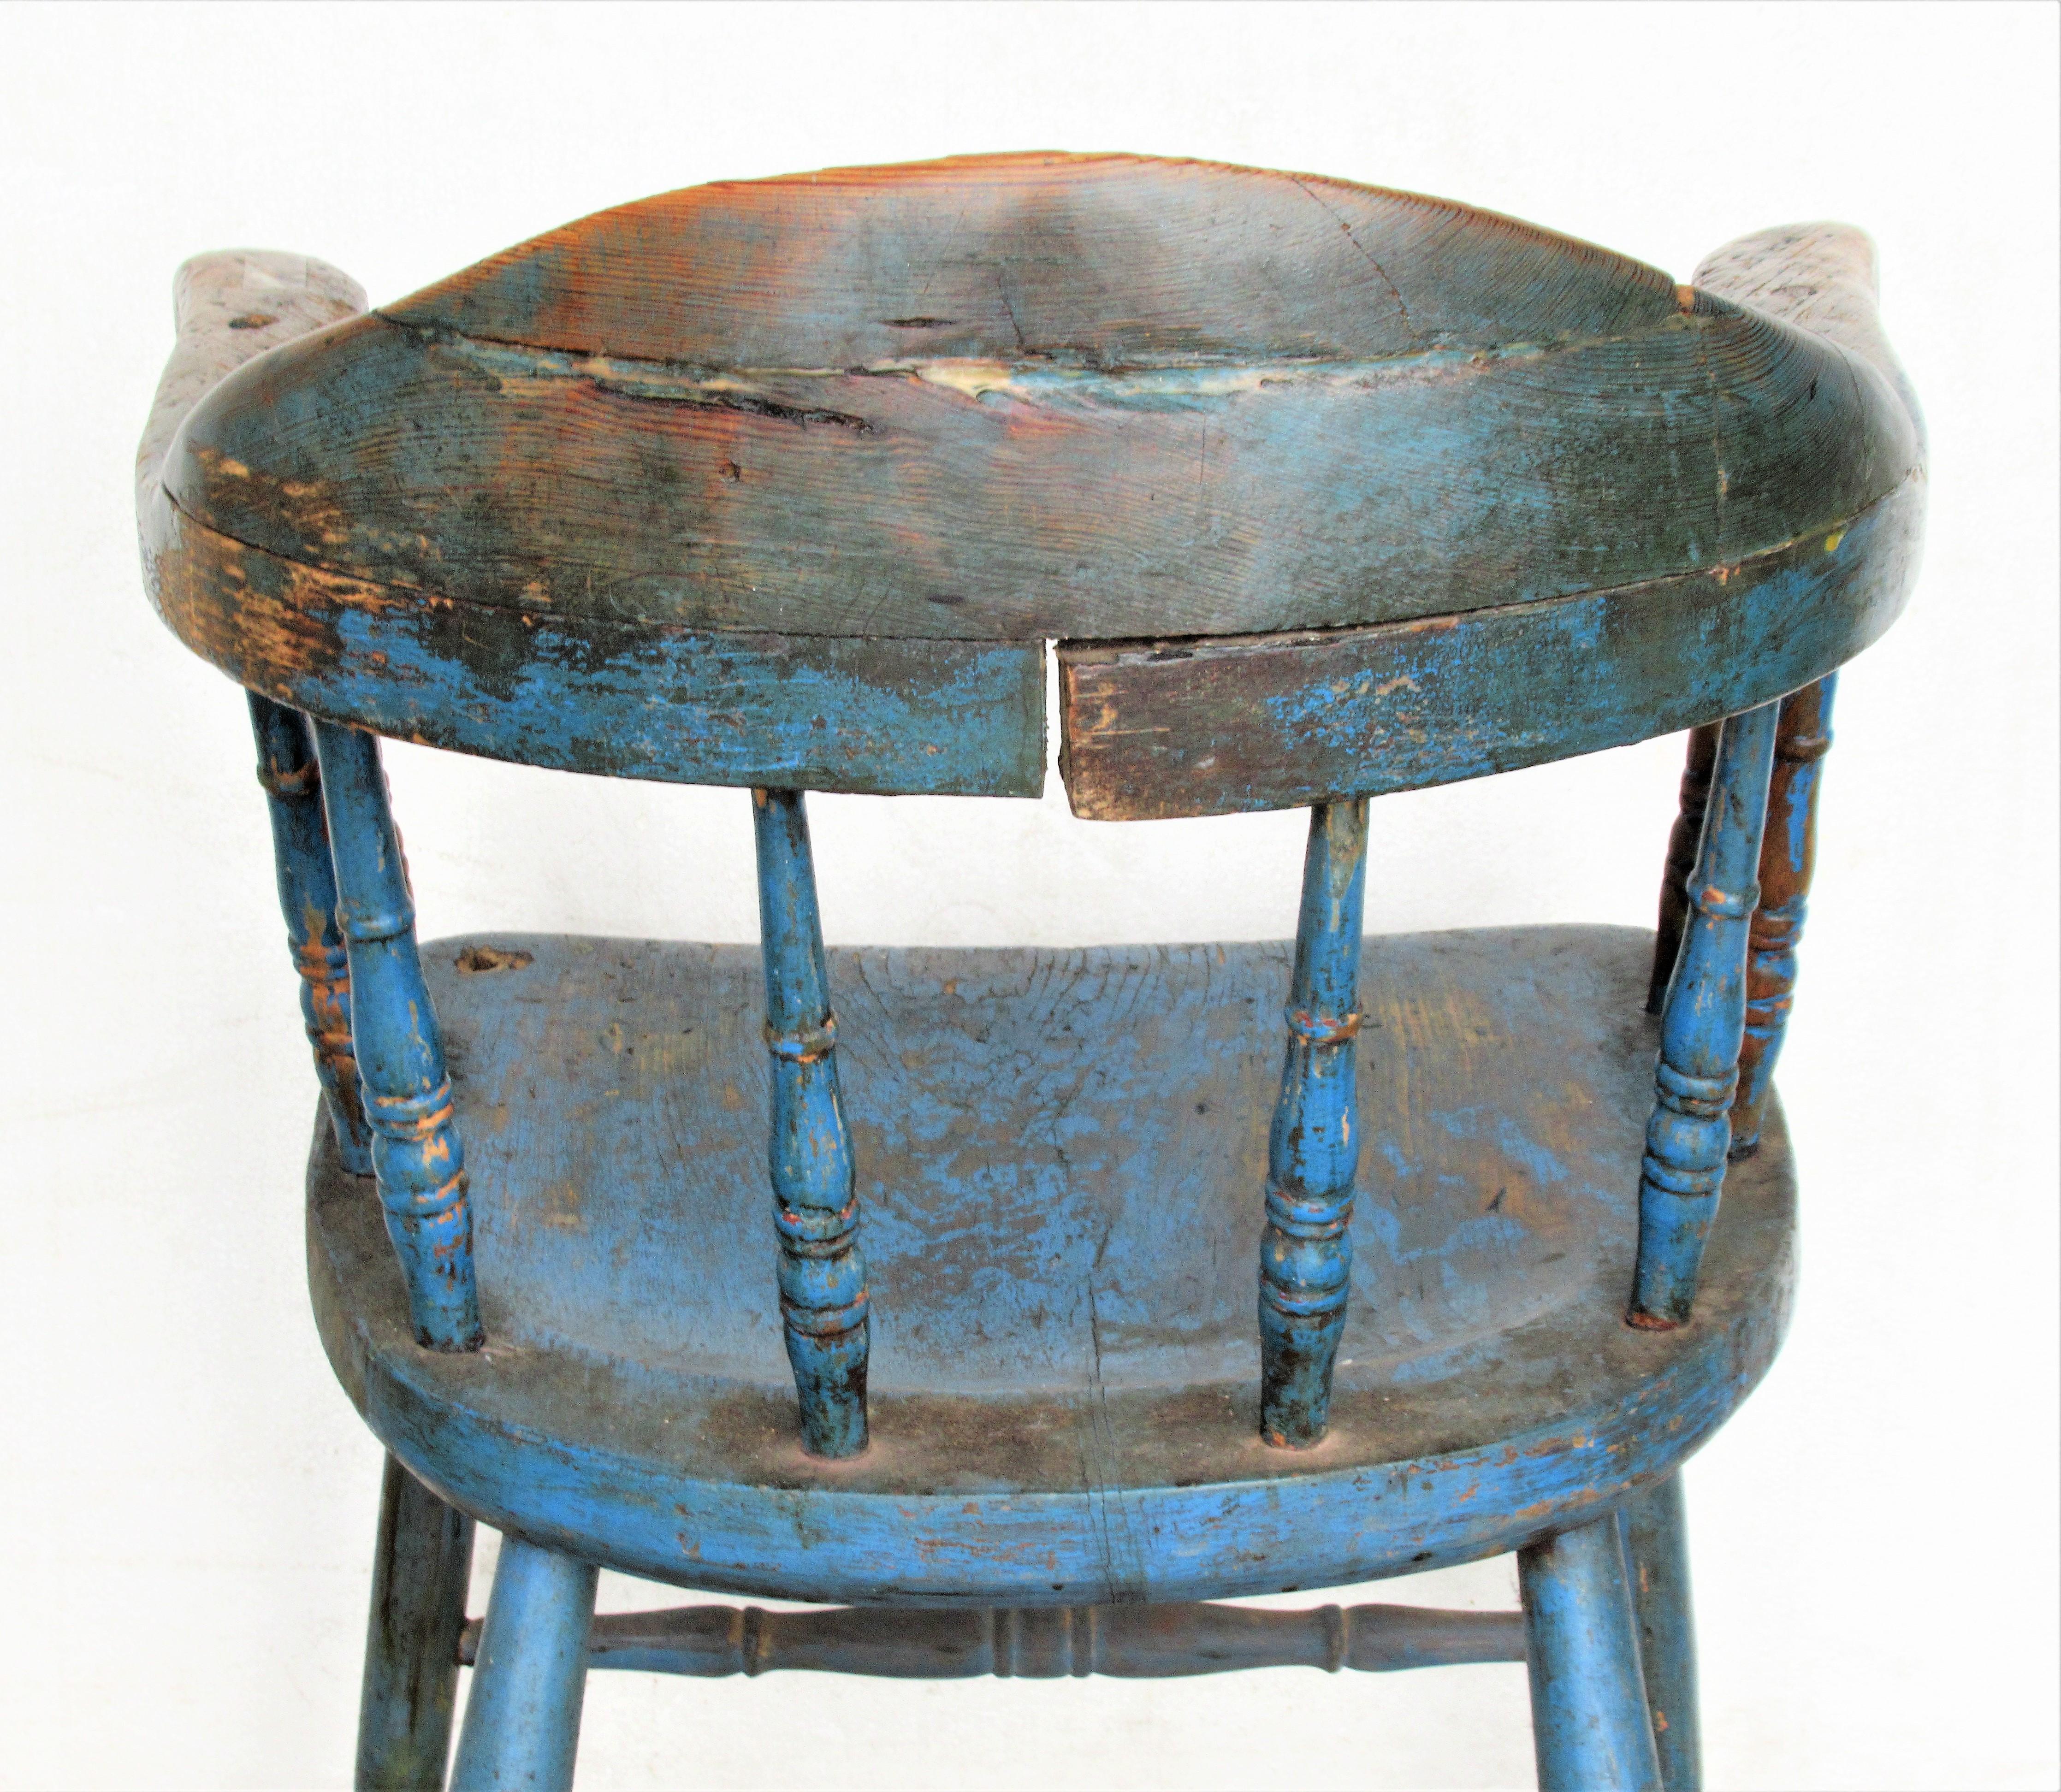 Antique American Firehouse Windsor Chair in Old Blue Paint 7